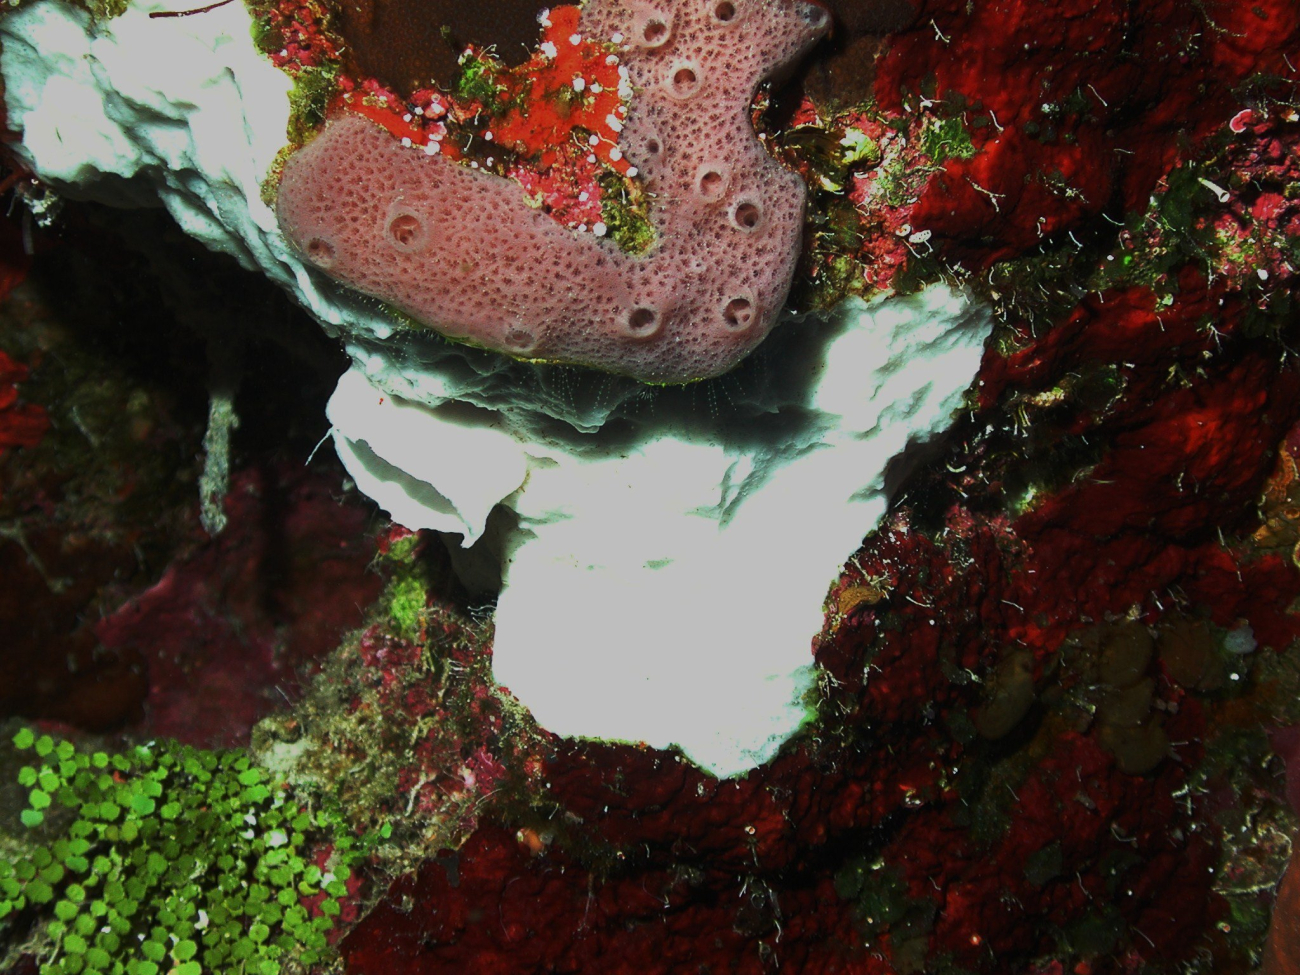 A view of the amazingly colorful sponge diversity on the wall